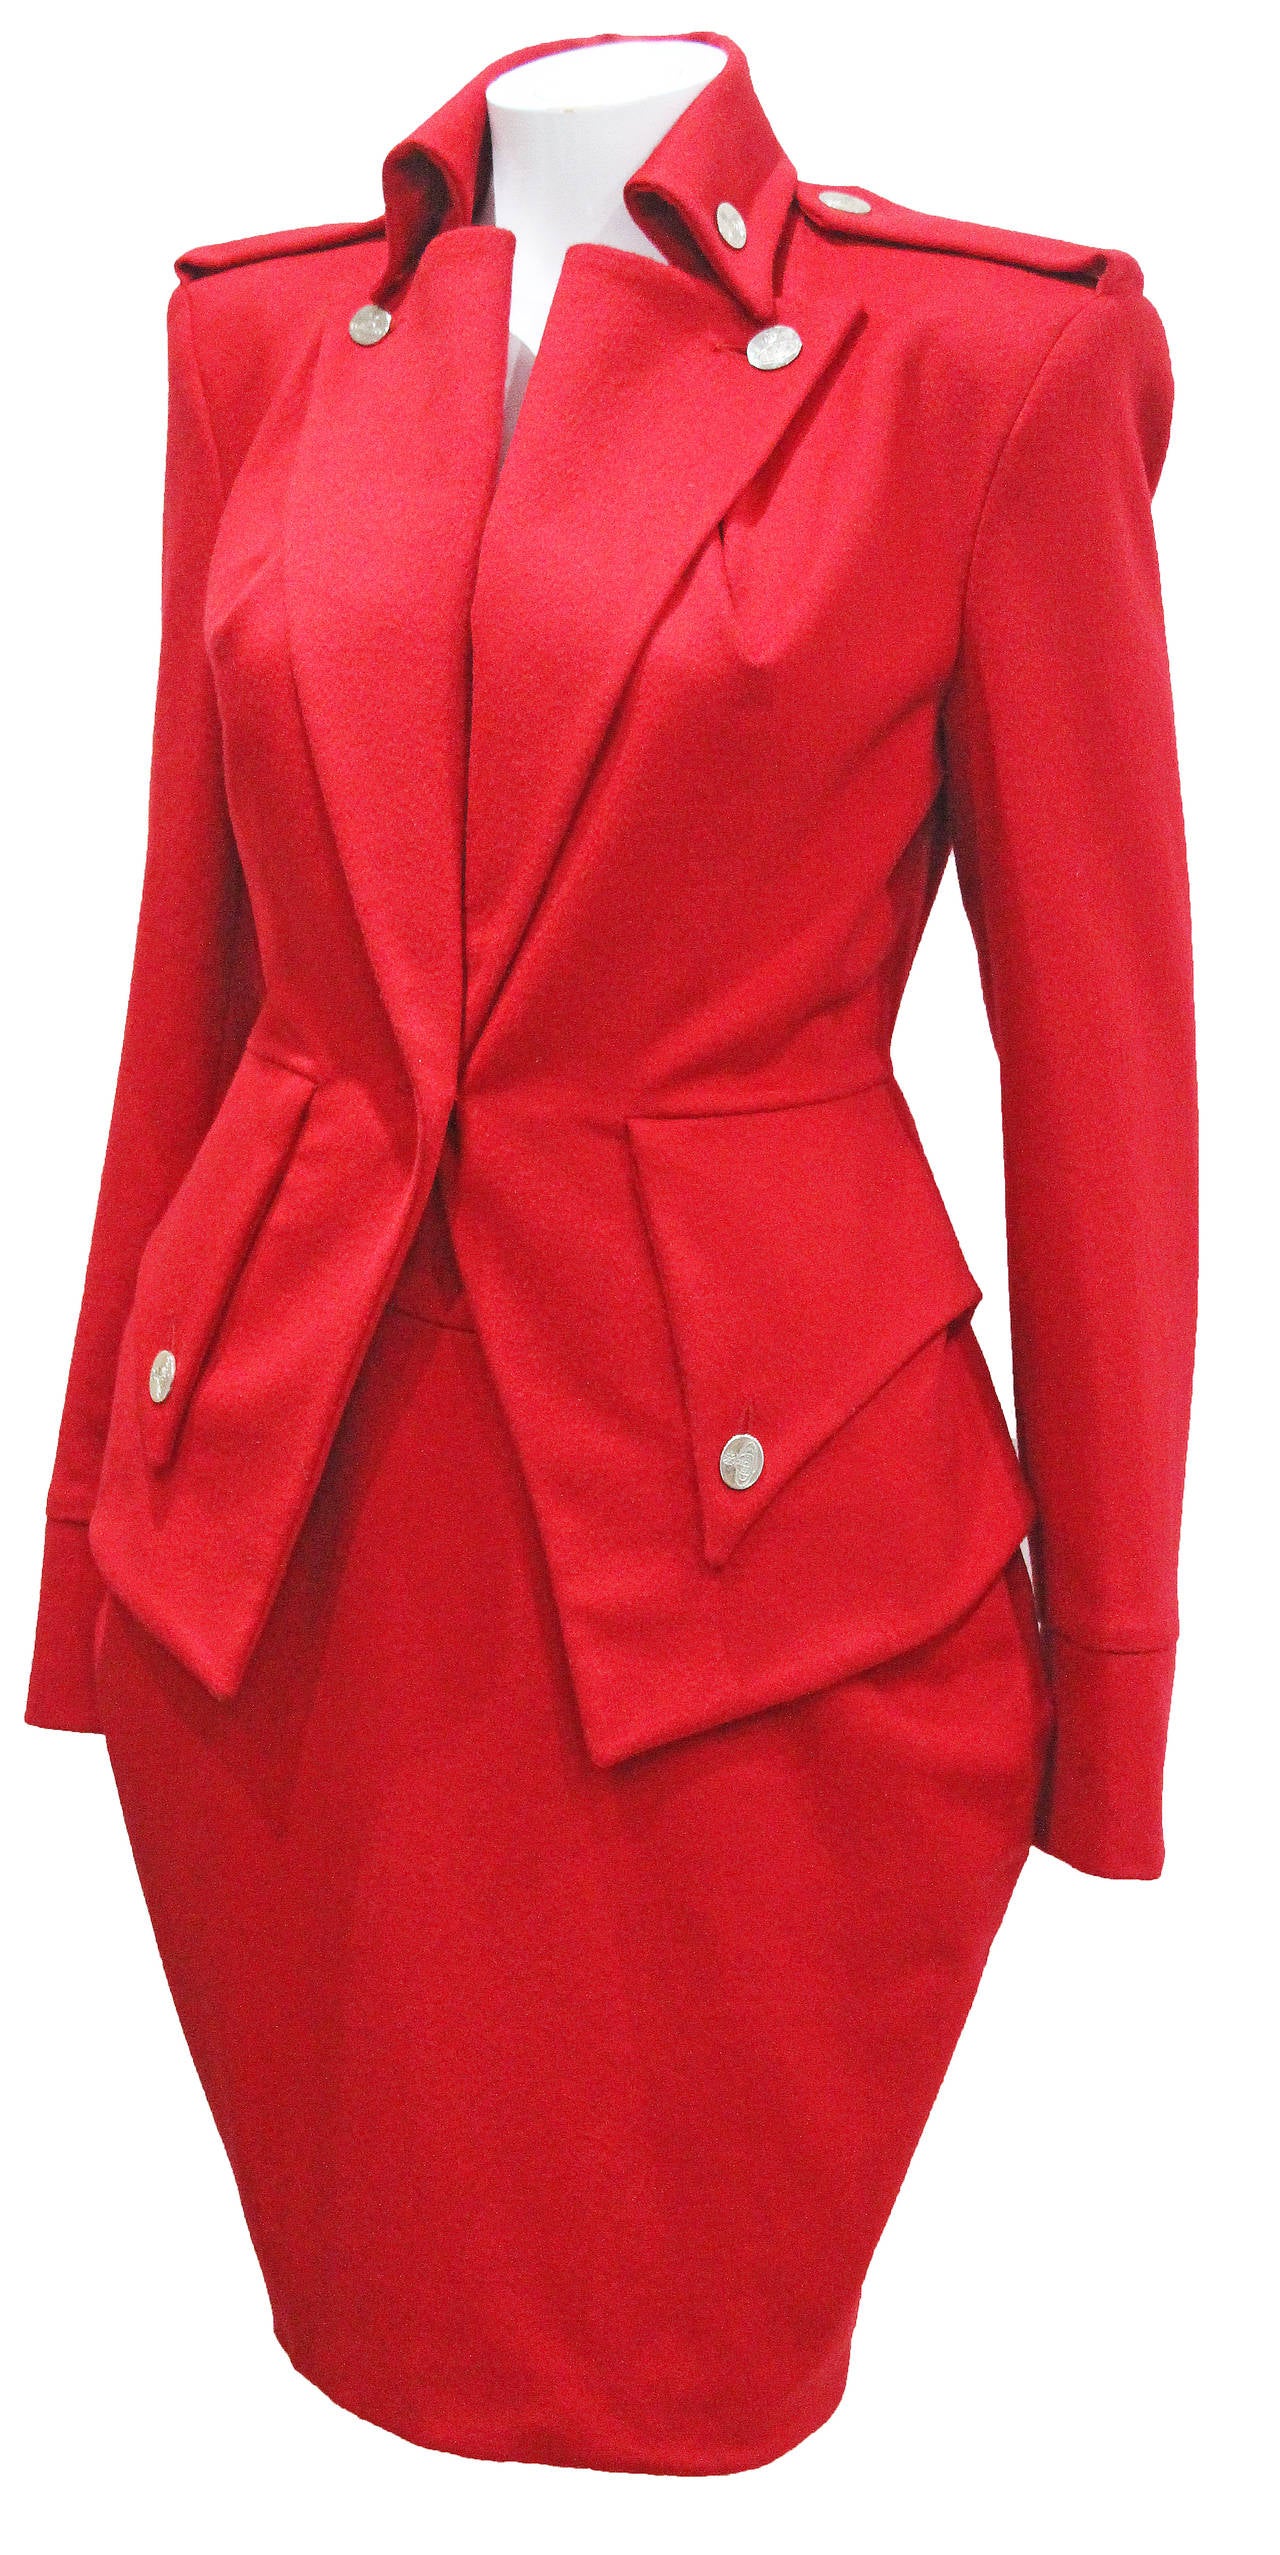 A fine and rare Vivienne Westwood tailored 2 piece skirt suit. The ensemble features a high waisted tulip skirt and a military inspired jacket with an hour glass cut and unique pleated to insinuate the waist. 

Condition: New with tags / Mint